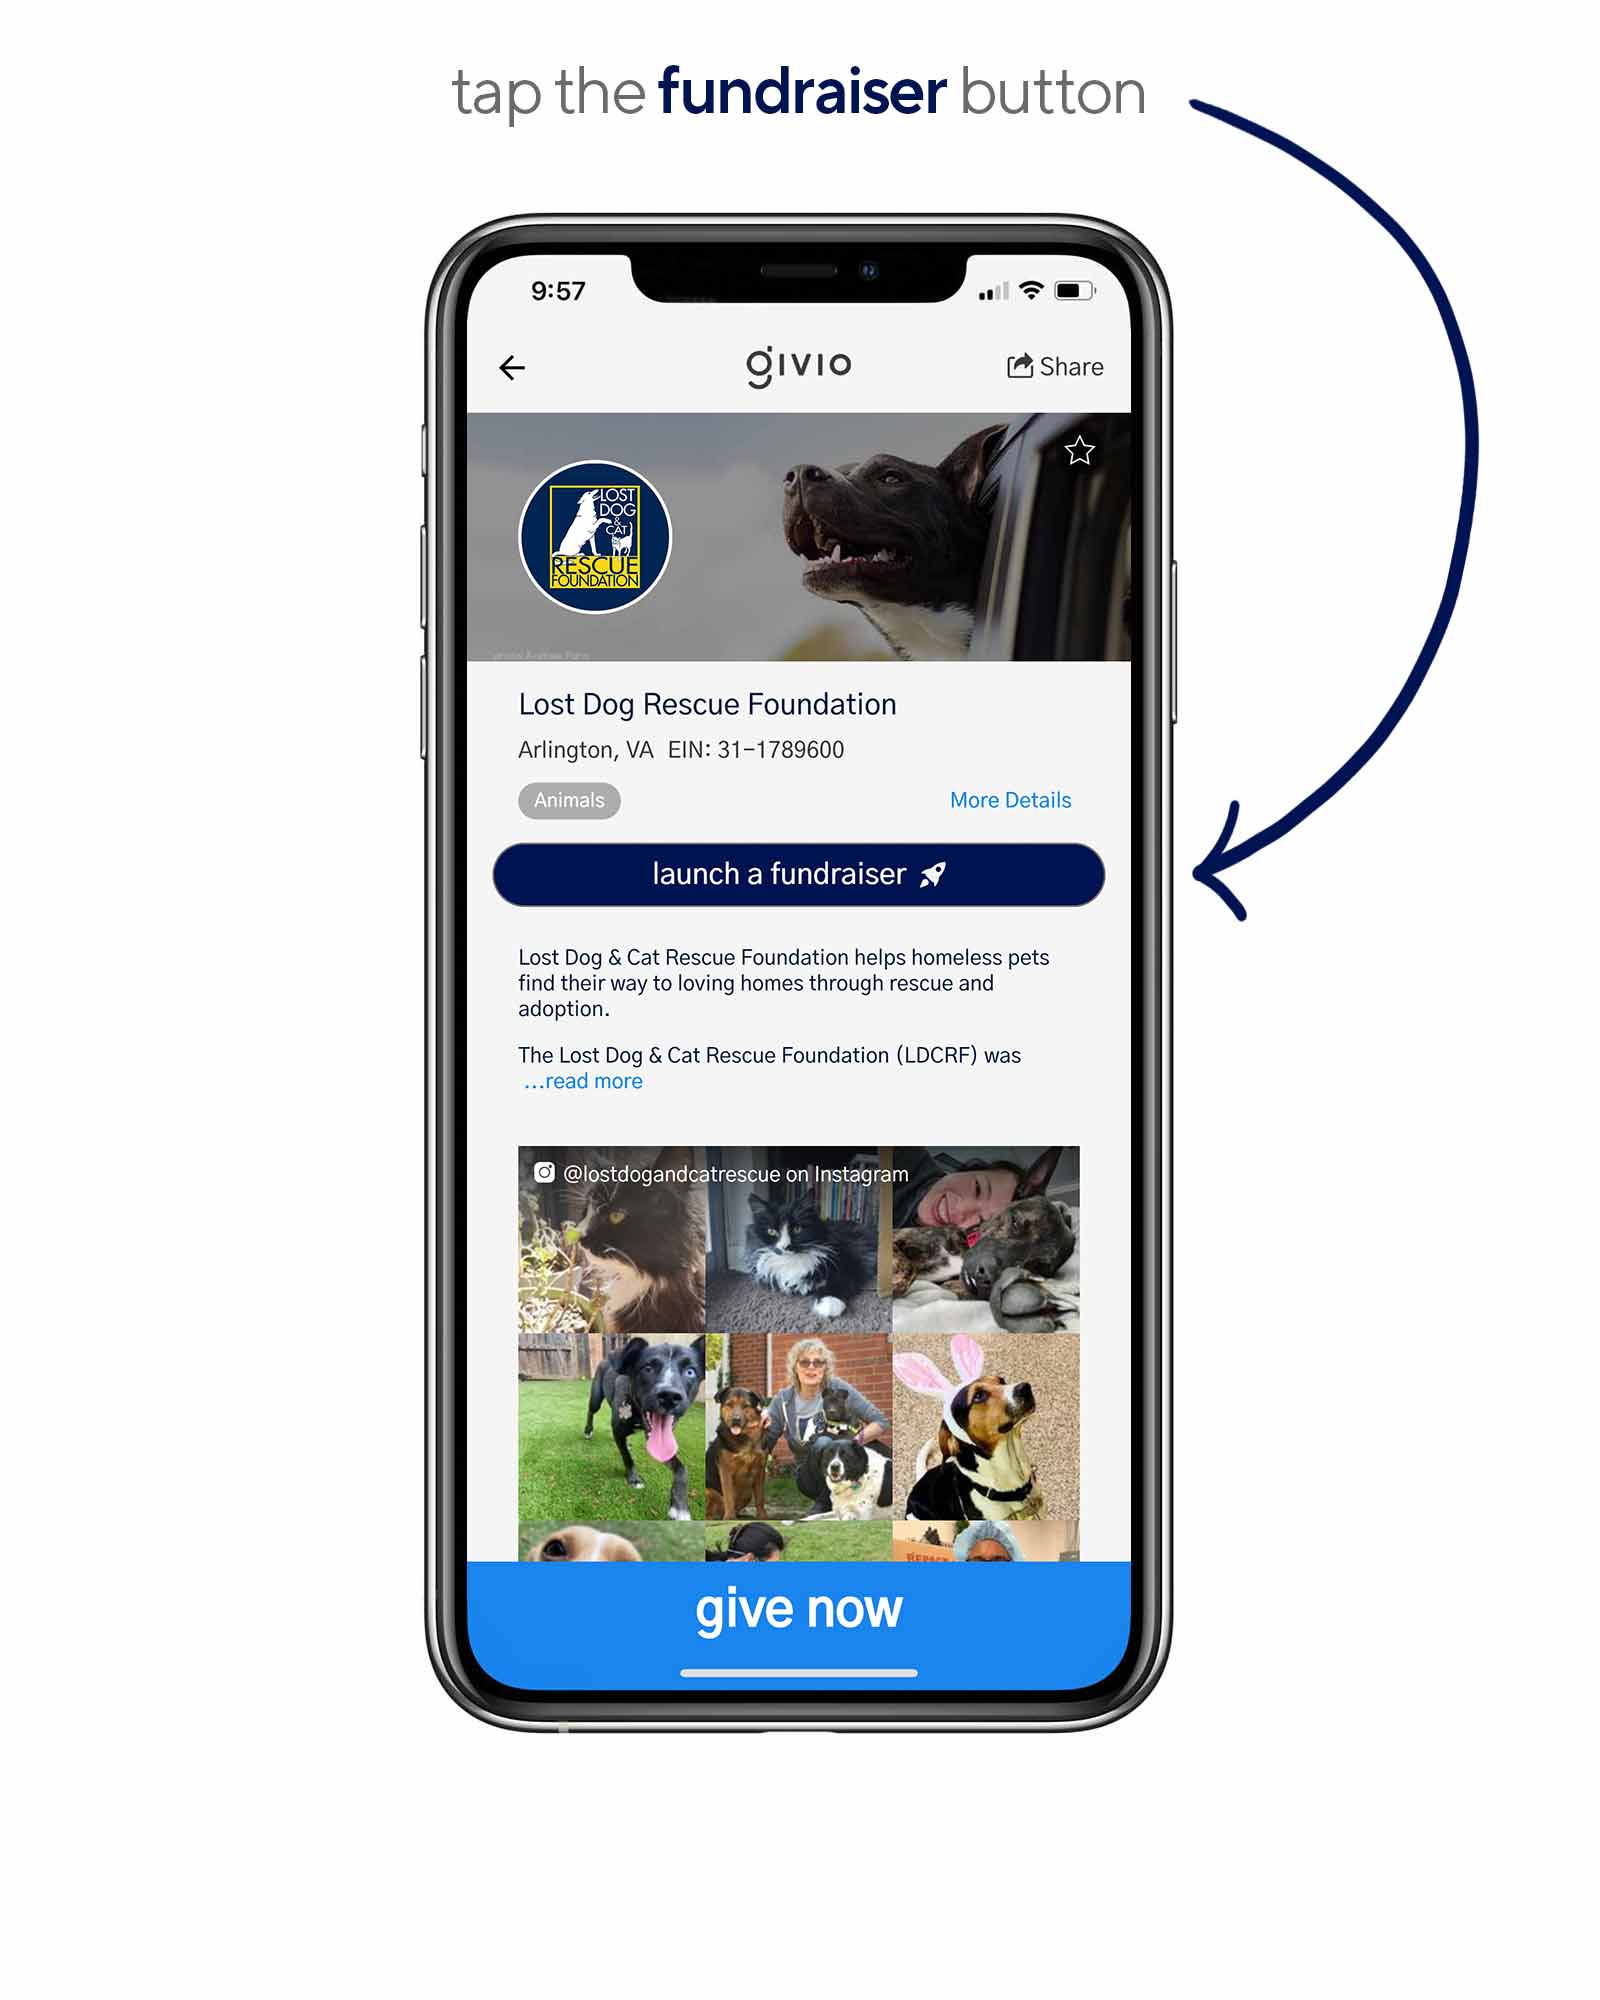 Every nonprofit page in the mobile Givio app has a “launch a fundraiser” button, making it super easy for supporters to launch campaigns on behalf of their favorite nonprofits